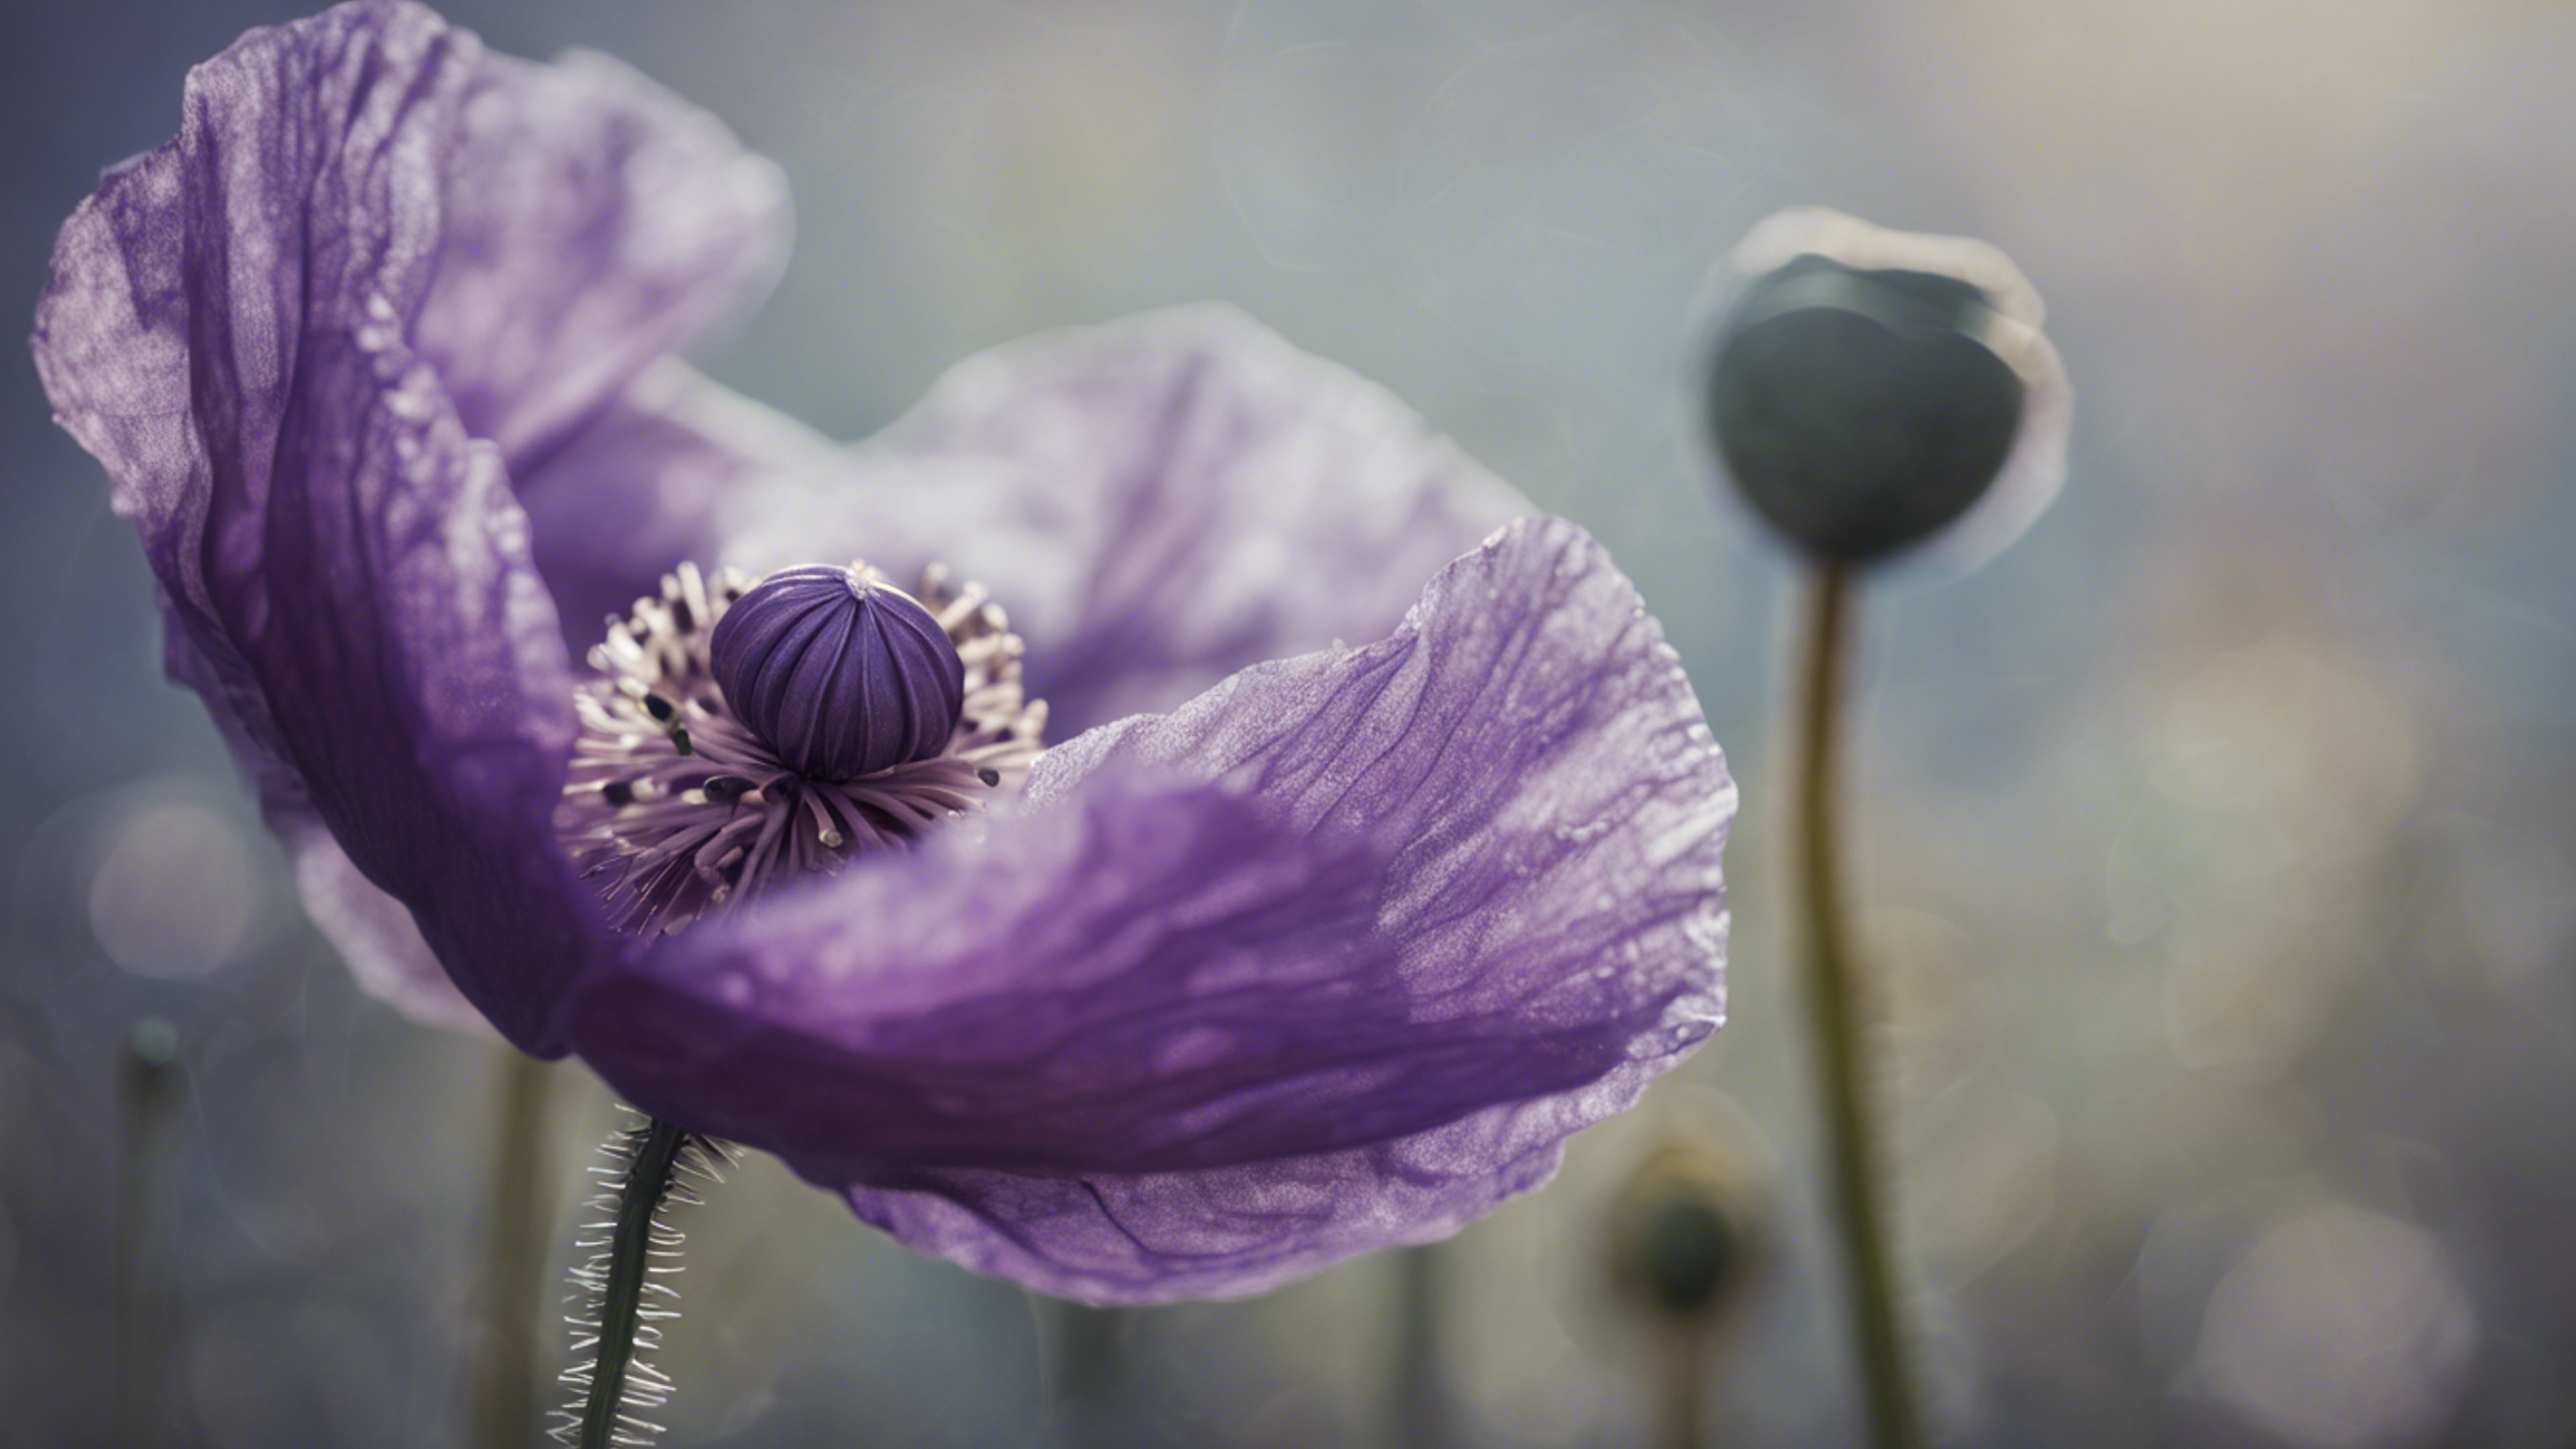 A close-up of a purple poppy with intricate details on a textured canvas. Ταπετσαρία[f5d07fa5408f4773ae7b]